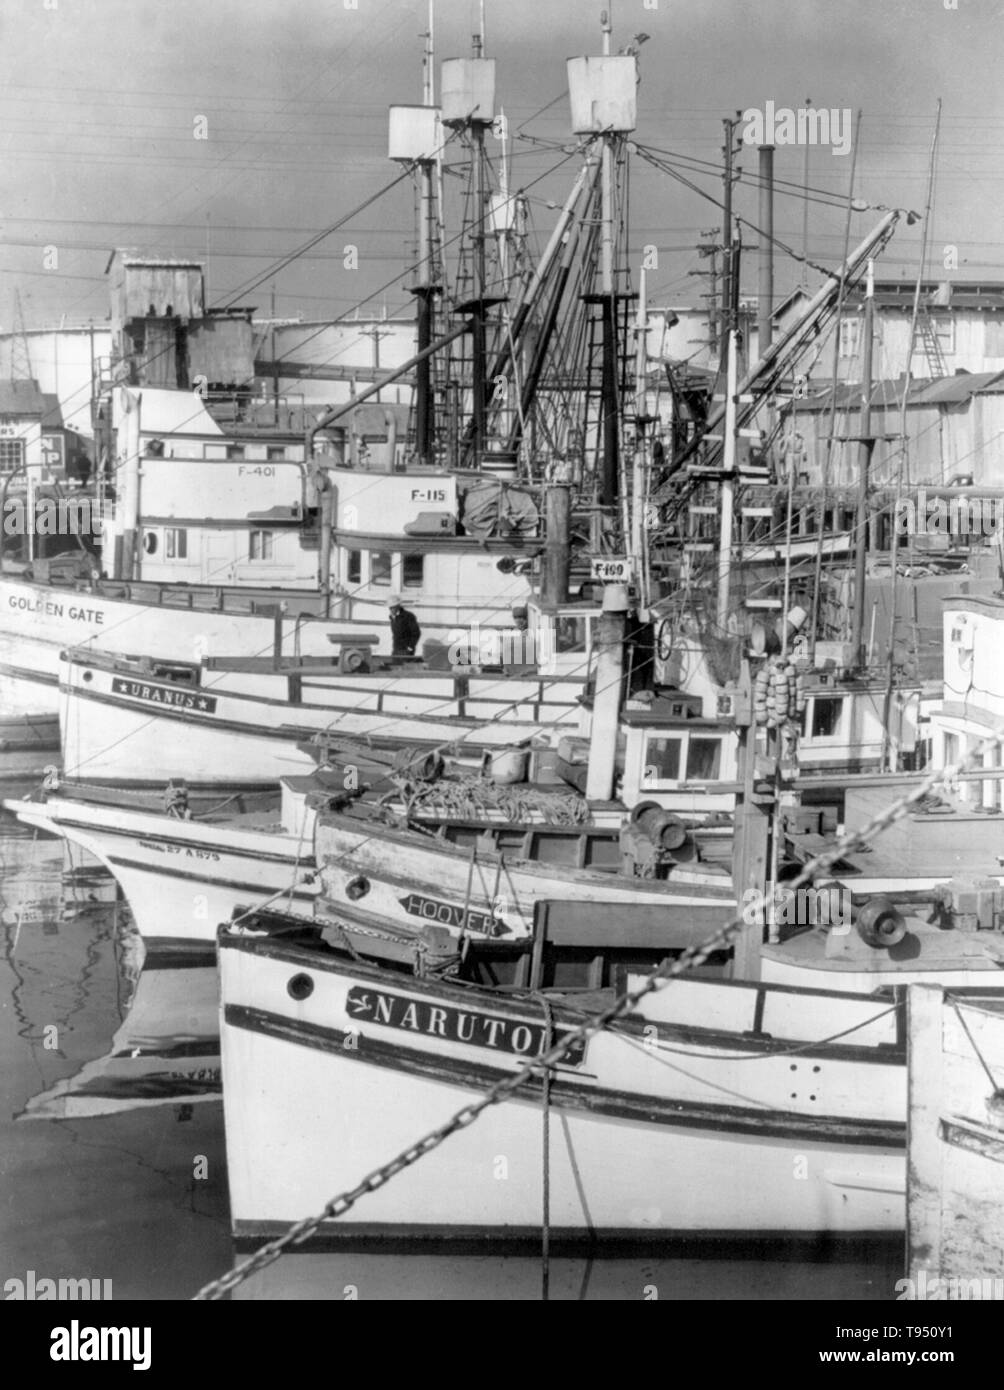 Entitled: 'Part of fleet of fishing boats tied up at Terminal Island, owned by Japanese-Americans.' The internment of Japanese-Americans during WWII was the forced relocation and incarceration in camps of 110,000-120,000 people of Japanese ancestry (62% of the internees were US citizens) ordered by President Roosevelt shortly after Japan's attack on Pearl Harbor. Japanese-Americans were incarcerated based on local population concentrations and regional politics. Stock Photo